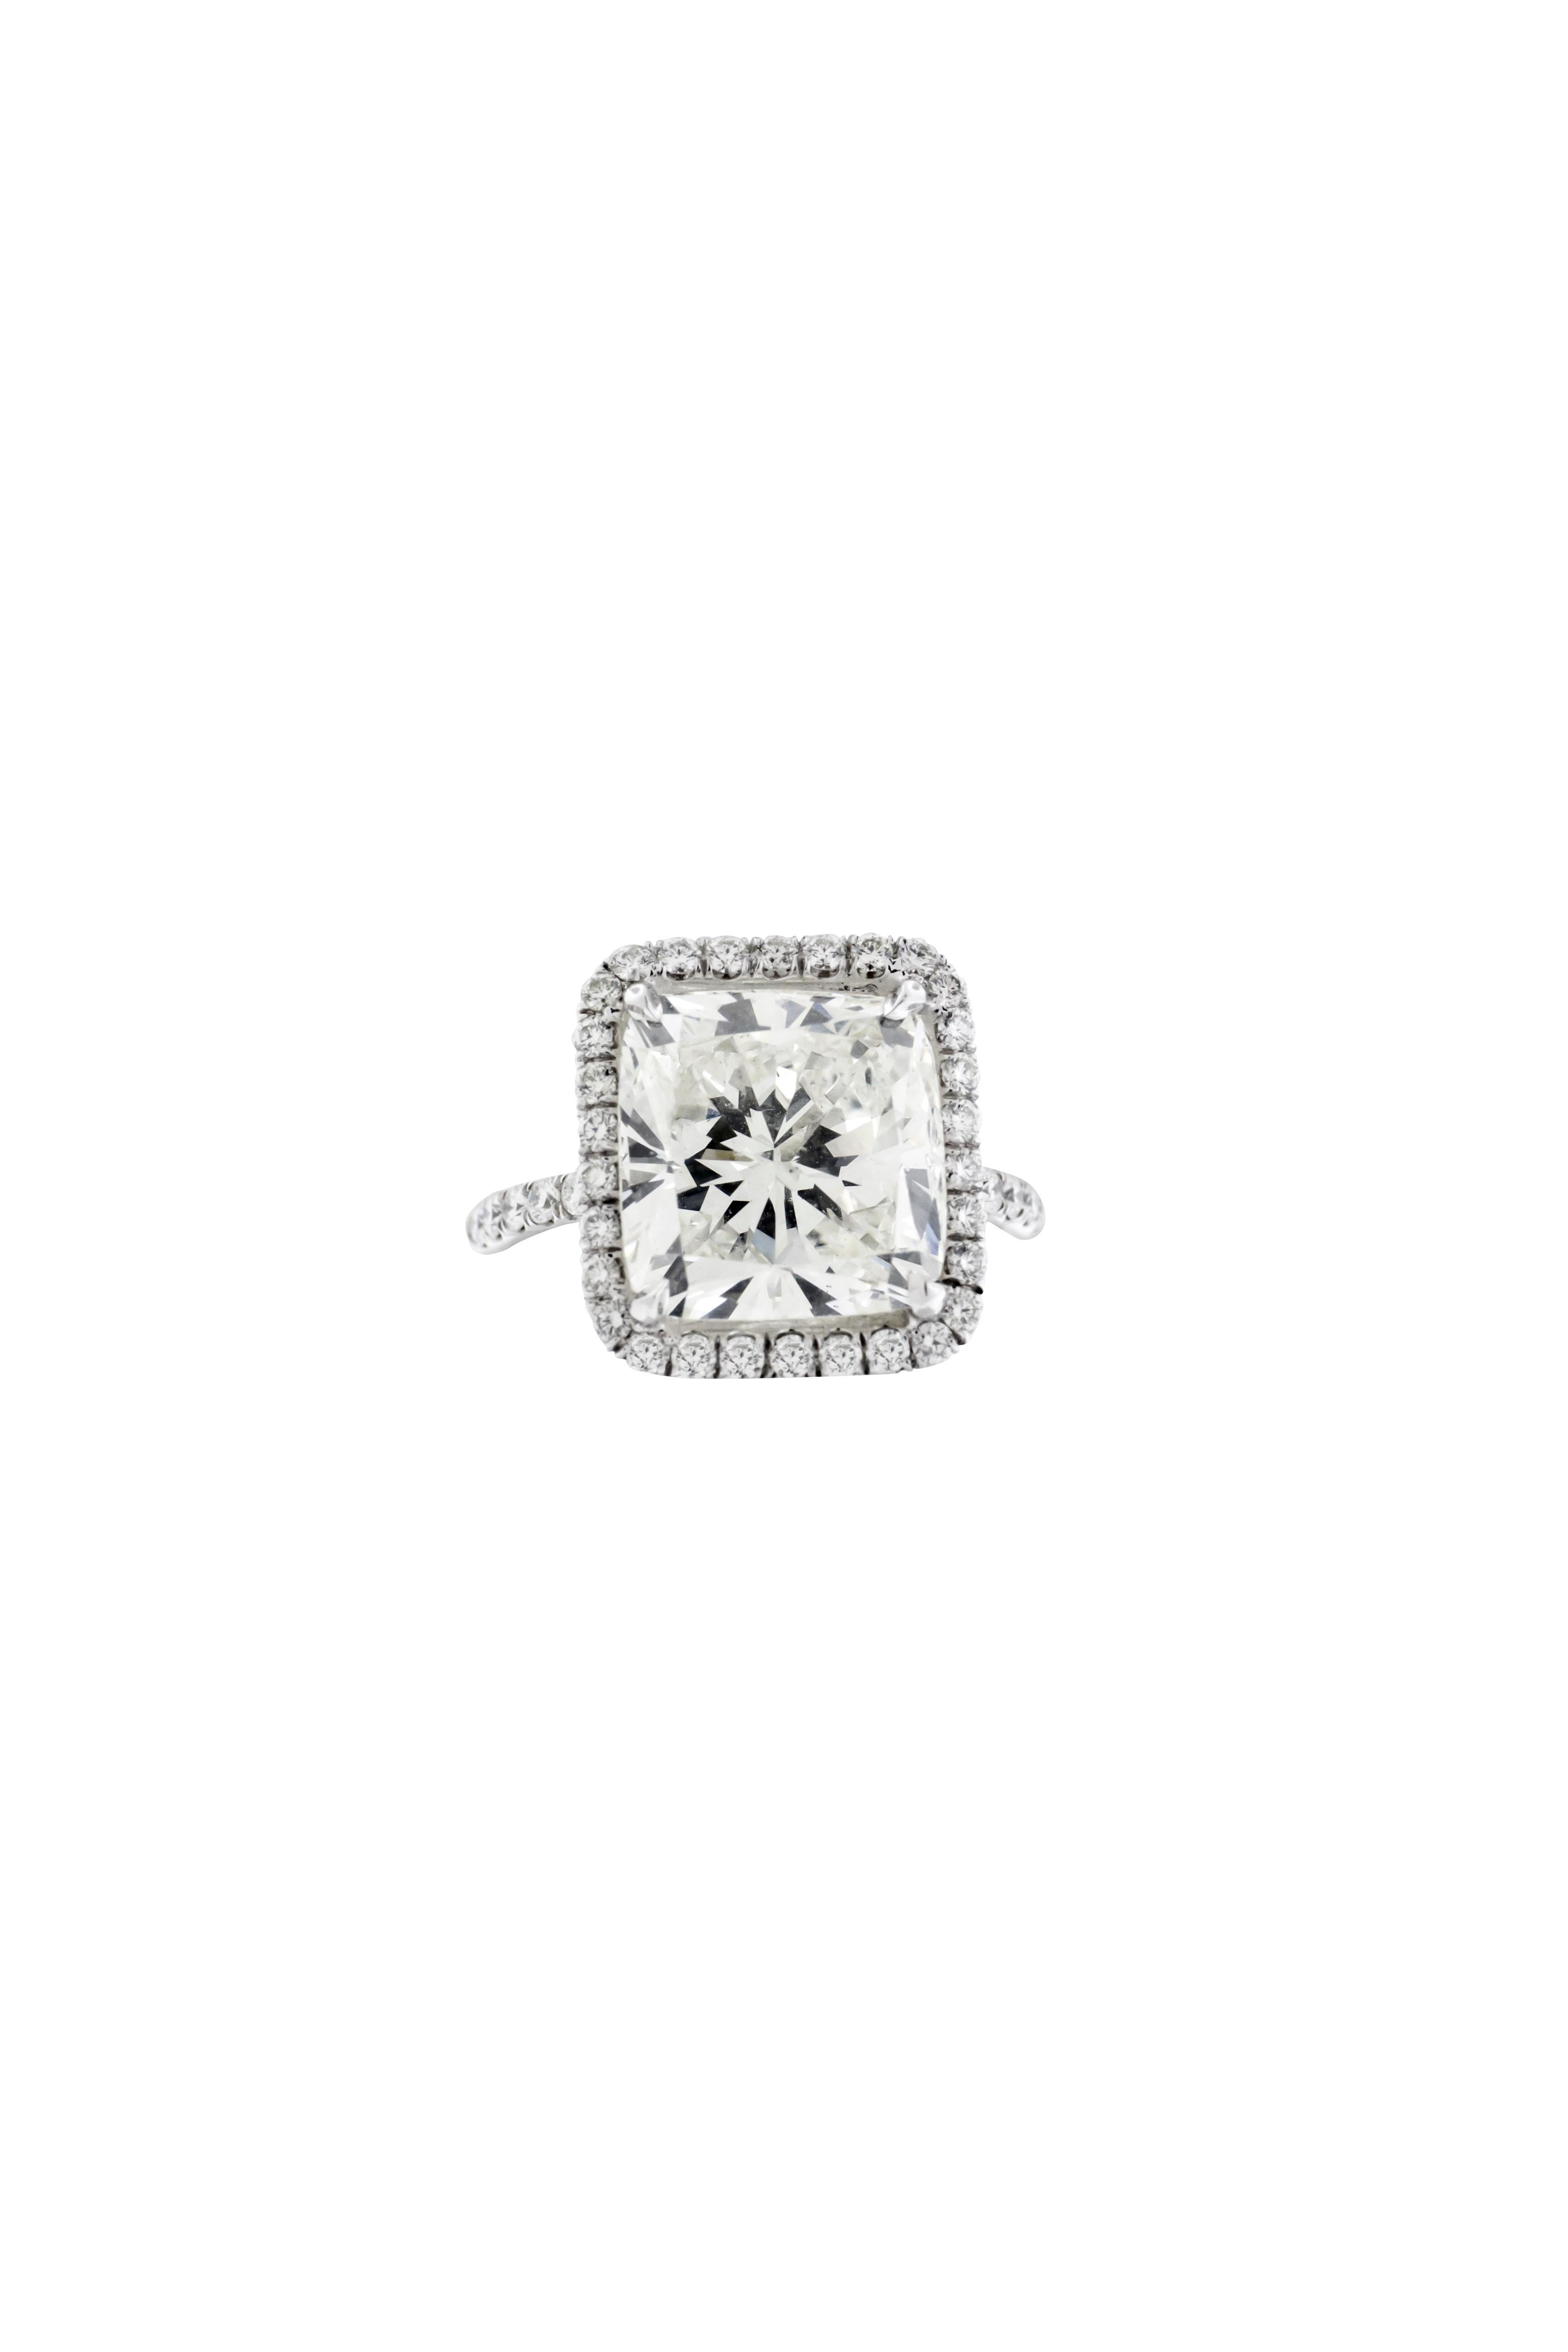 Contemporary 7.06 Carat Cushion Cut GIA Certified Engagement Ring